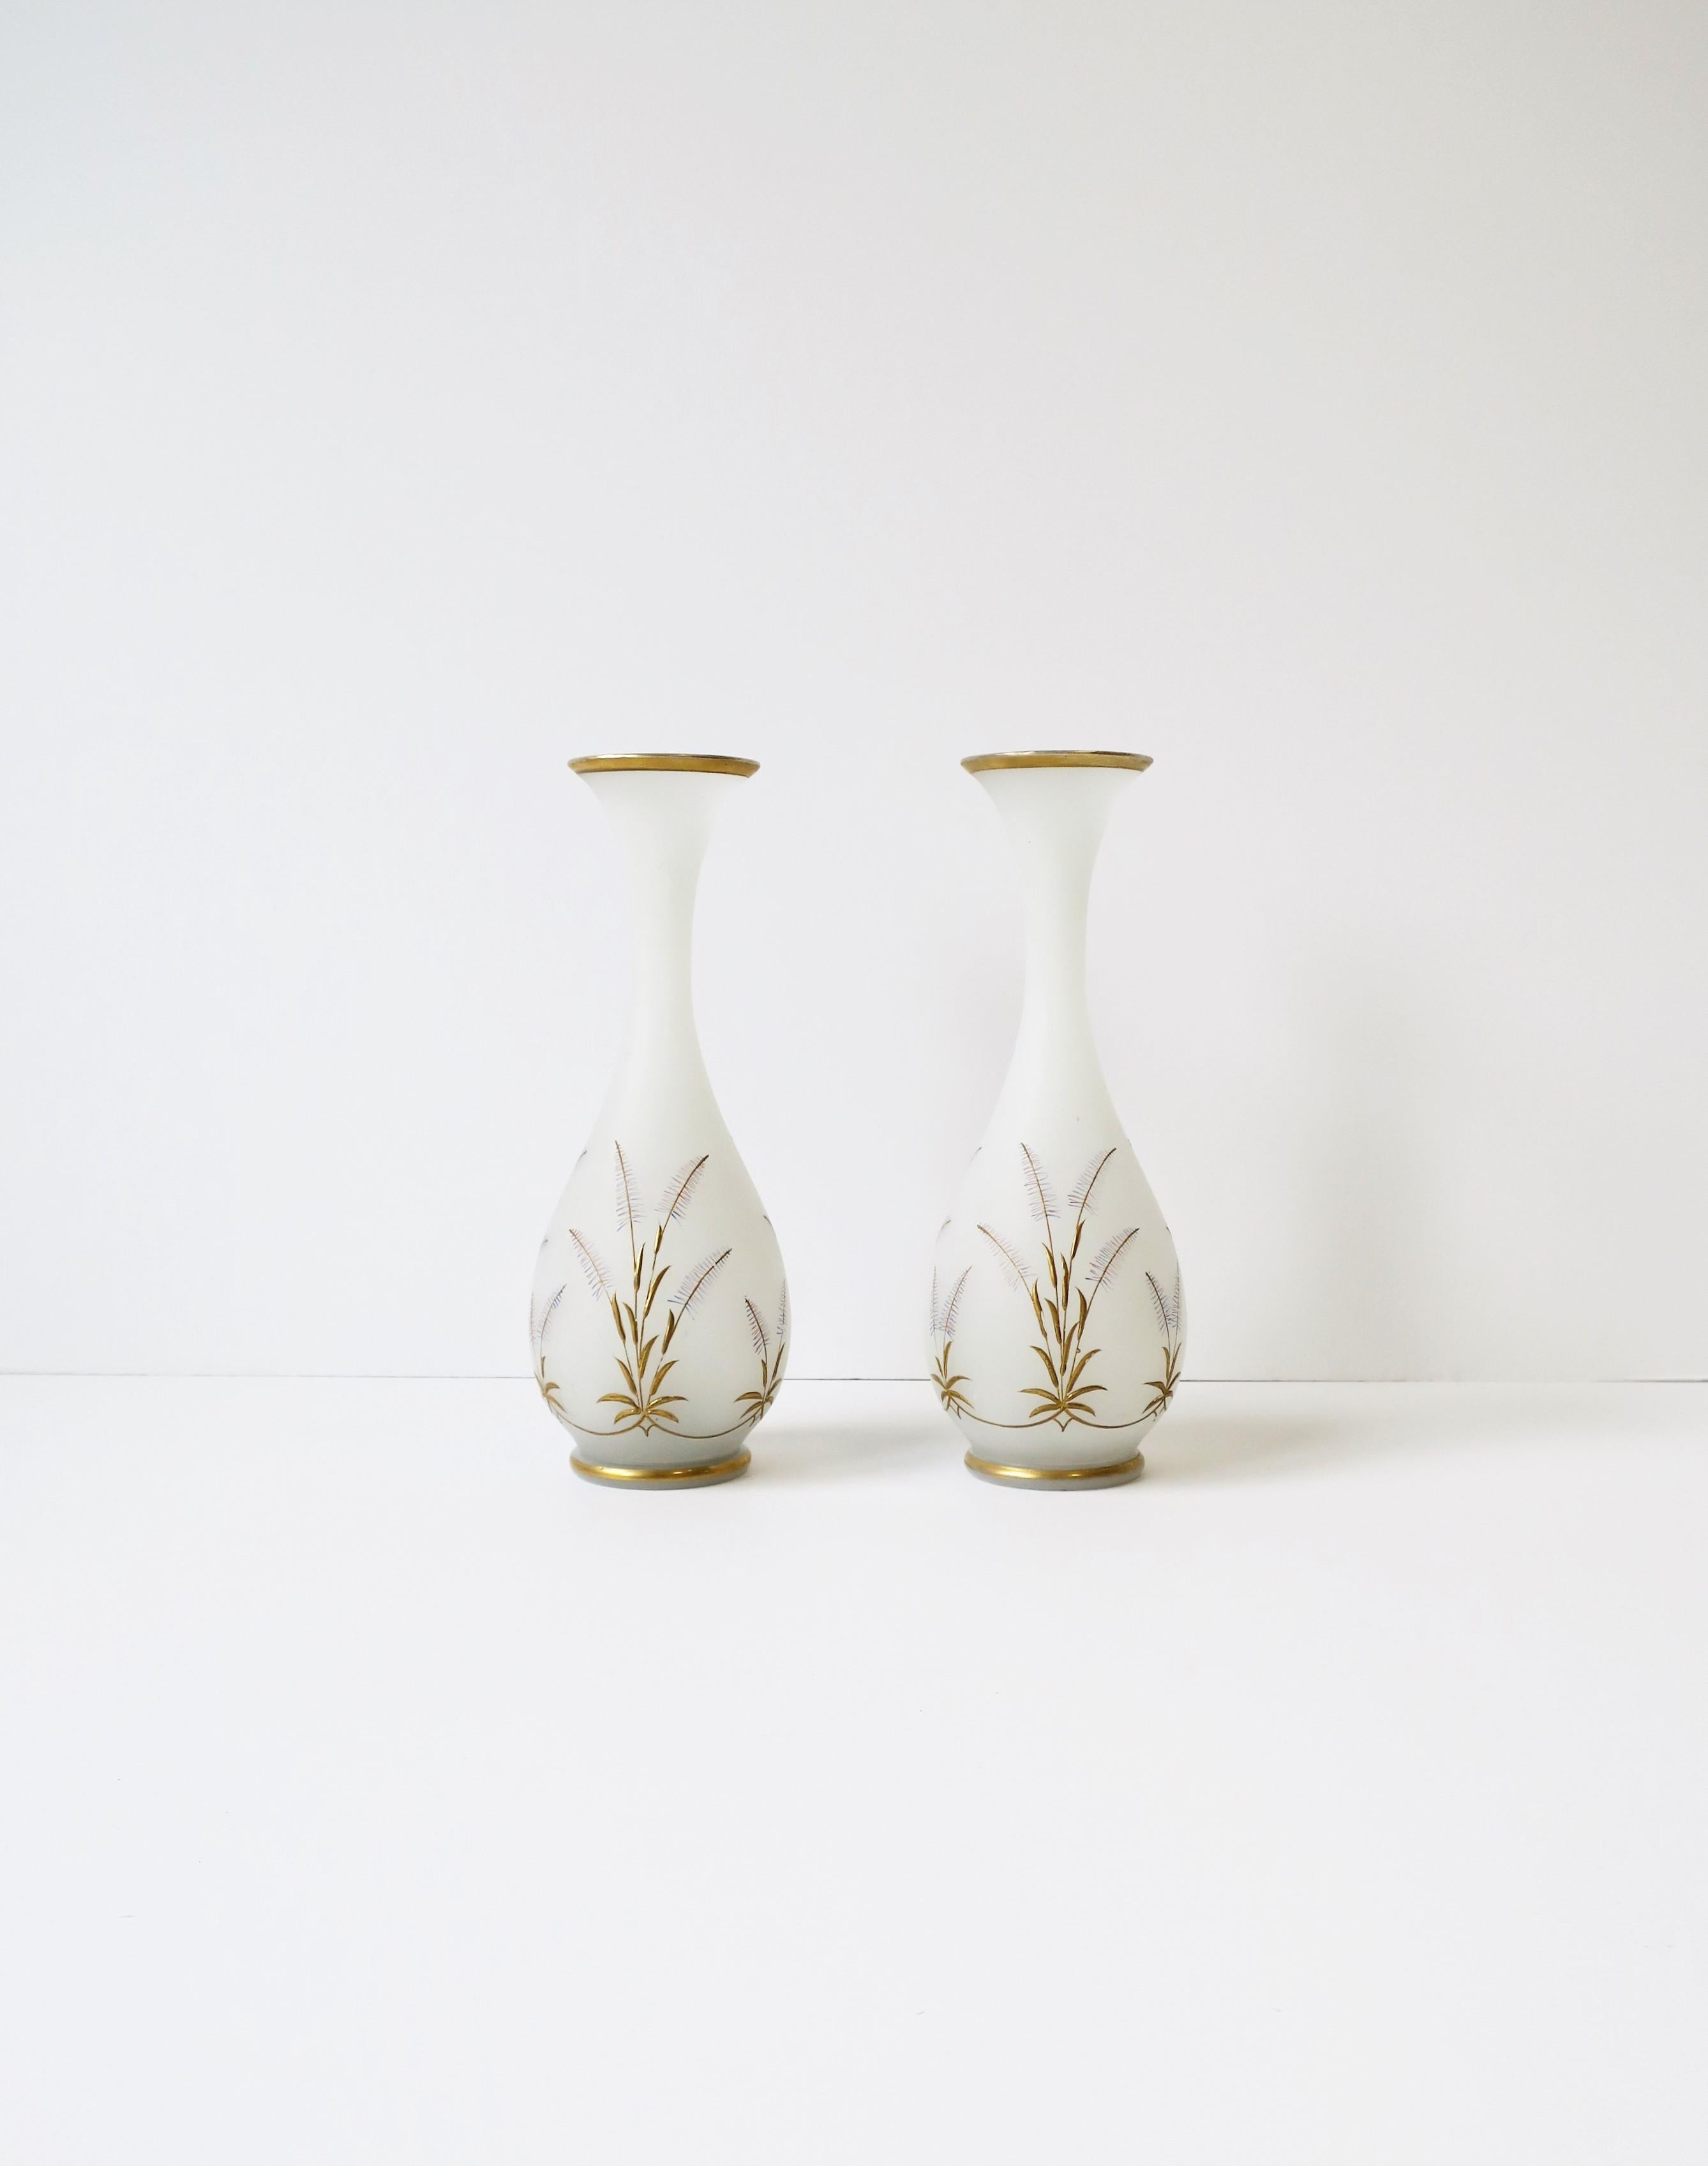 A beautiful pair of Italian white opaline and gold glass vases, circa early-20th century, Italy. Vases are white opaline matte exterior with a raised gold sheef-of-wheat relief design. A gold band a top and bottom edge as well. A beautiful set as